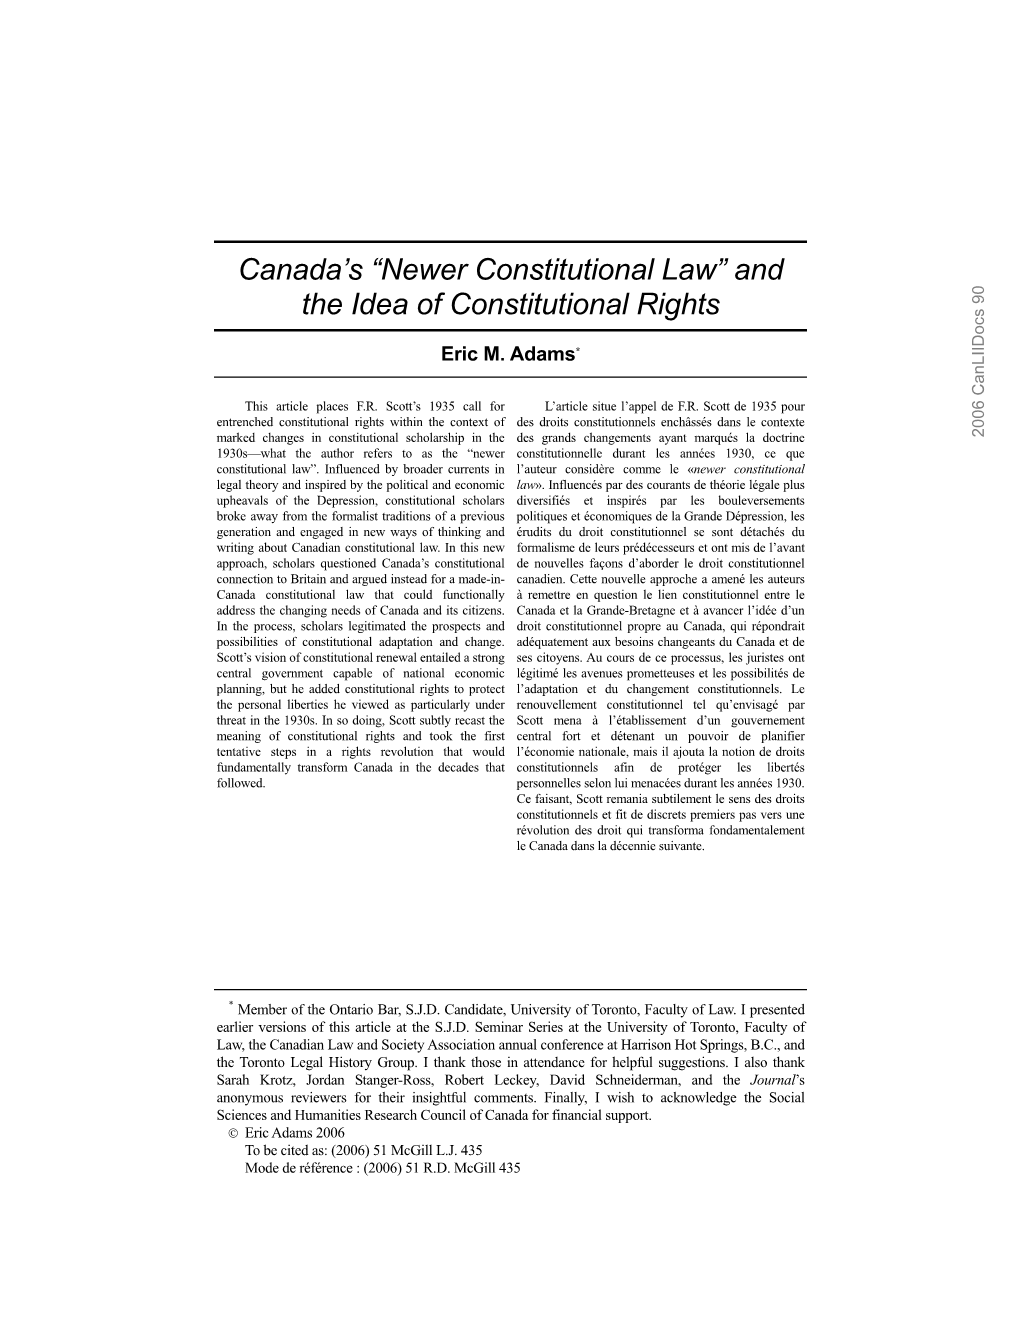 Newer Constitutional Law” and the Idea of Constitutional Rights